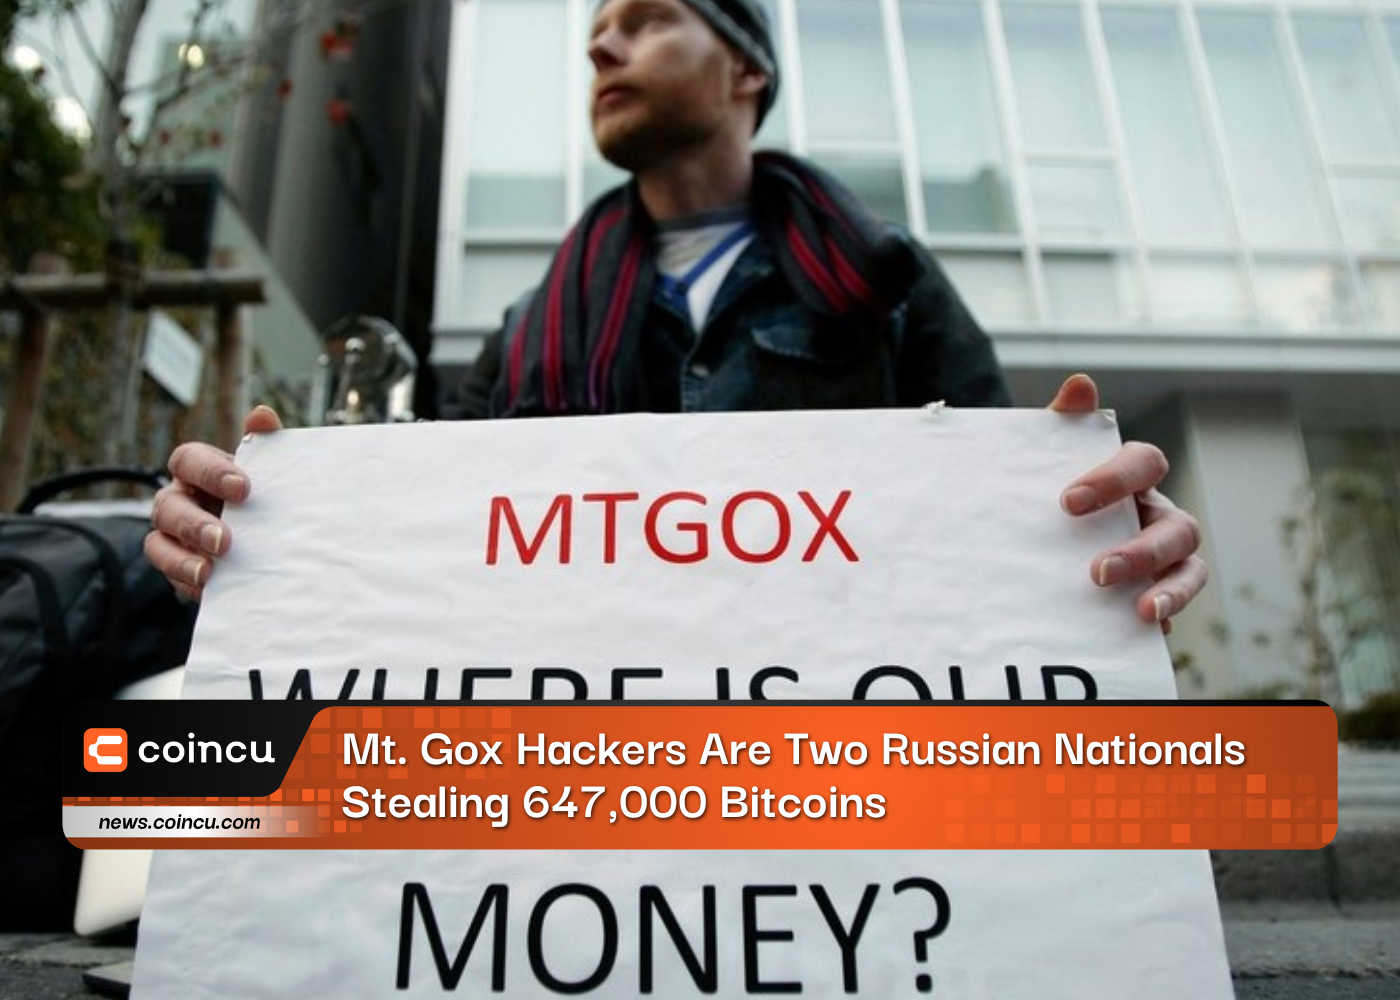 Mt. Gox Hackers Are Two Russian Nationals Stealing 647,000 Bitcoins